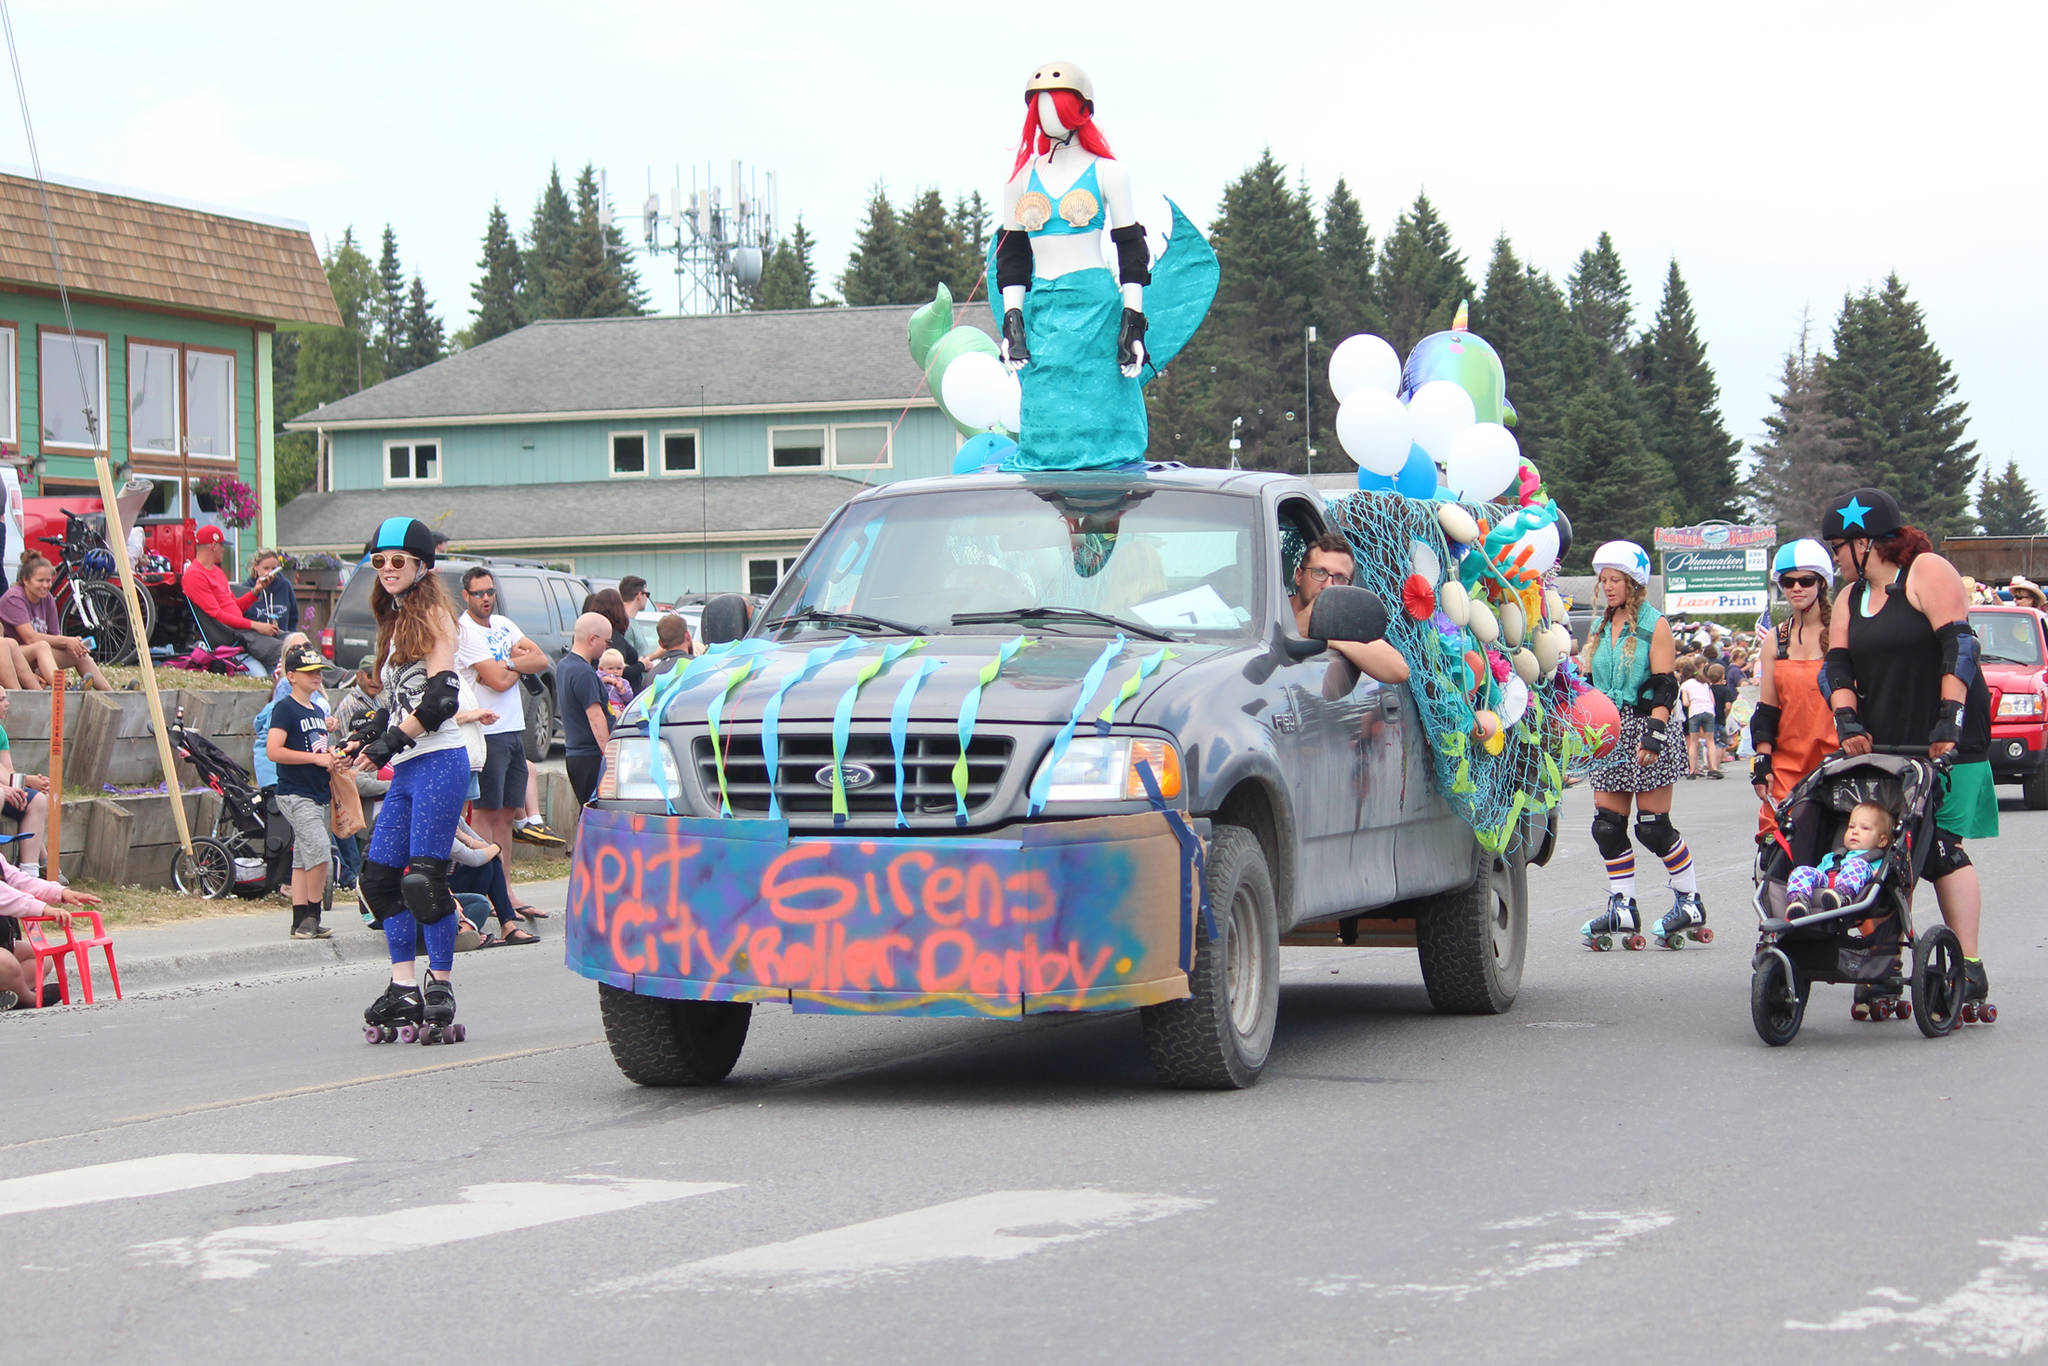 Members of the Spit City Sirens roller derby team make their way down Pioneer Avenue in this year’s July Fourth parade hosted by the Homer Chamber of Commerce on Thursday, July 4, 2019 in Homer, Alaska. (Photo by Megan Pacer/Homer News)